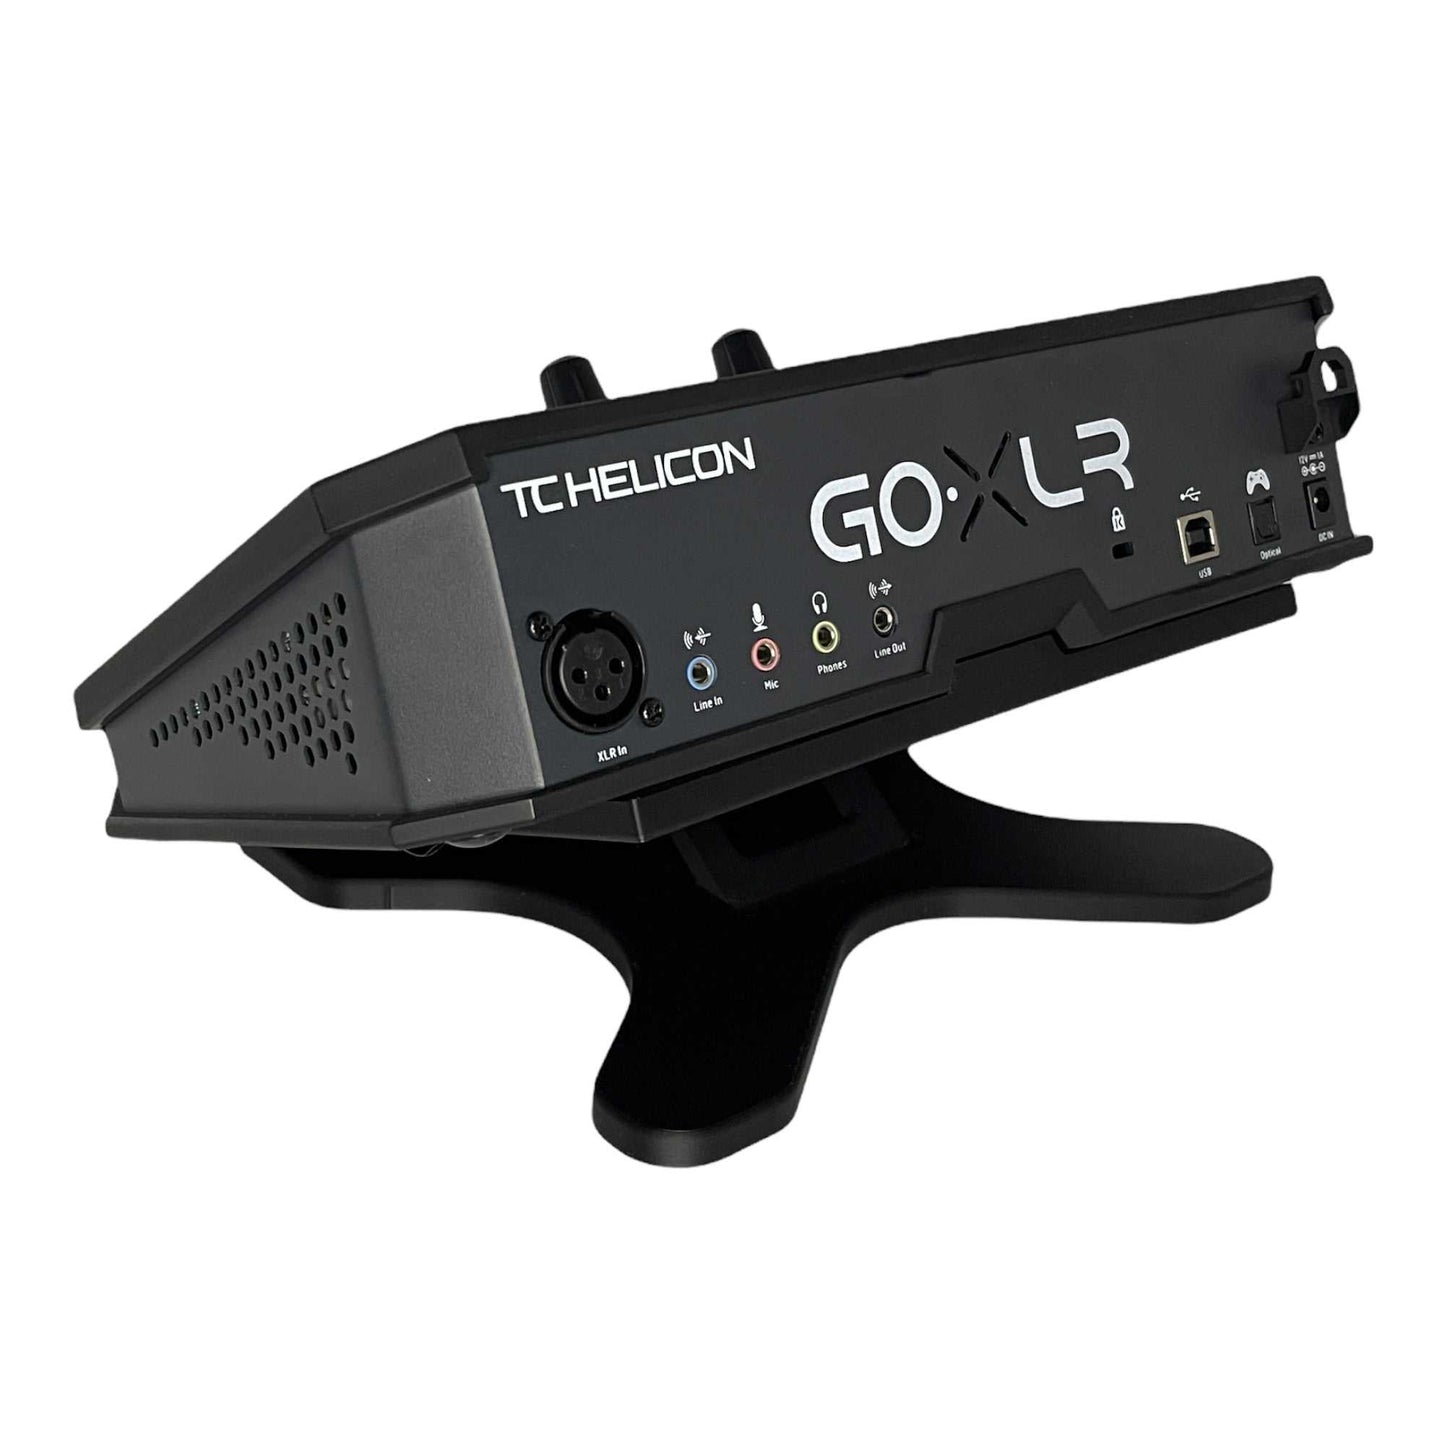 Desktop Tilting Stand for TC Helicon GOXLR